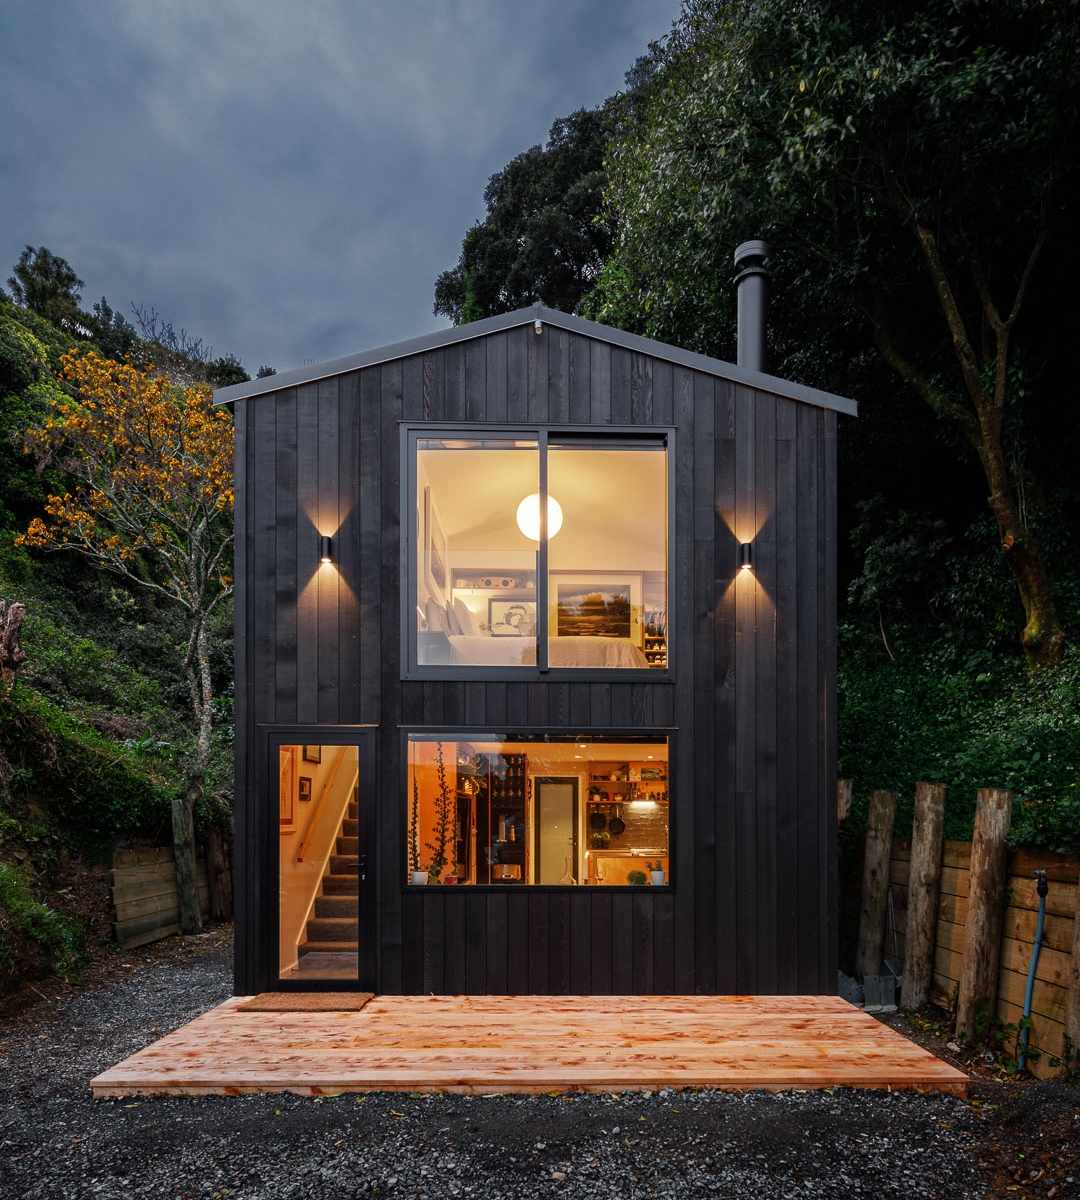 Vogeltown tiny home pictured at night